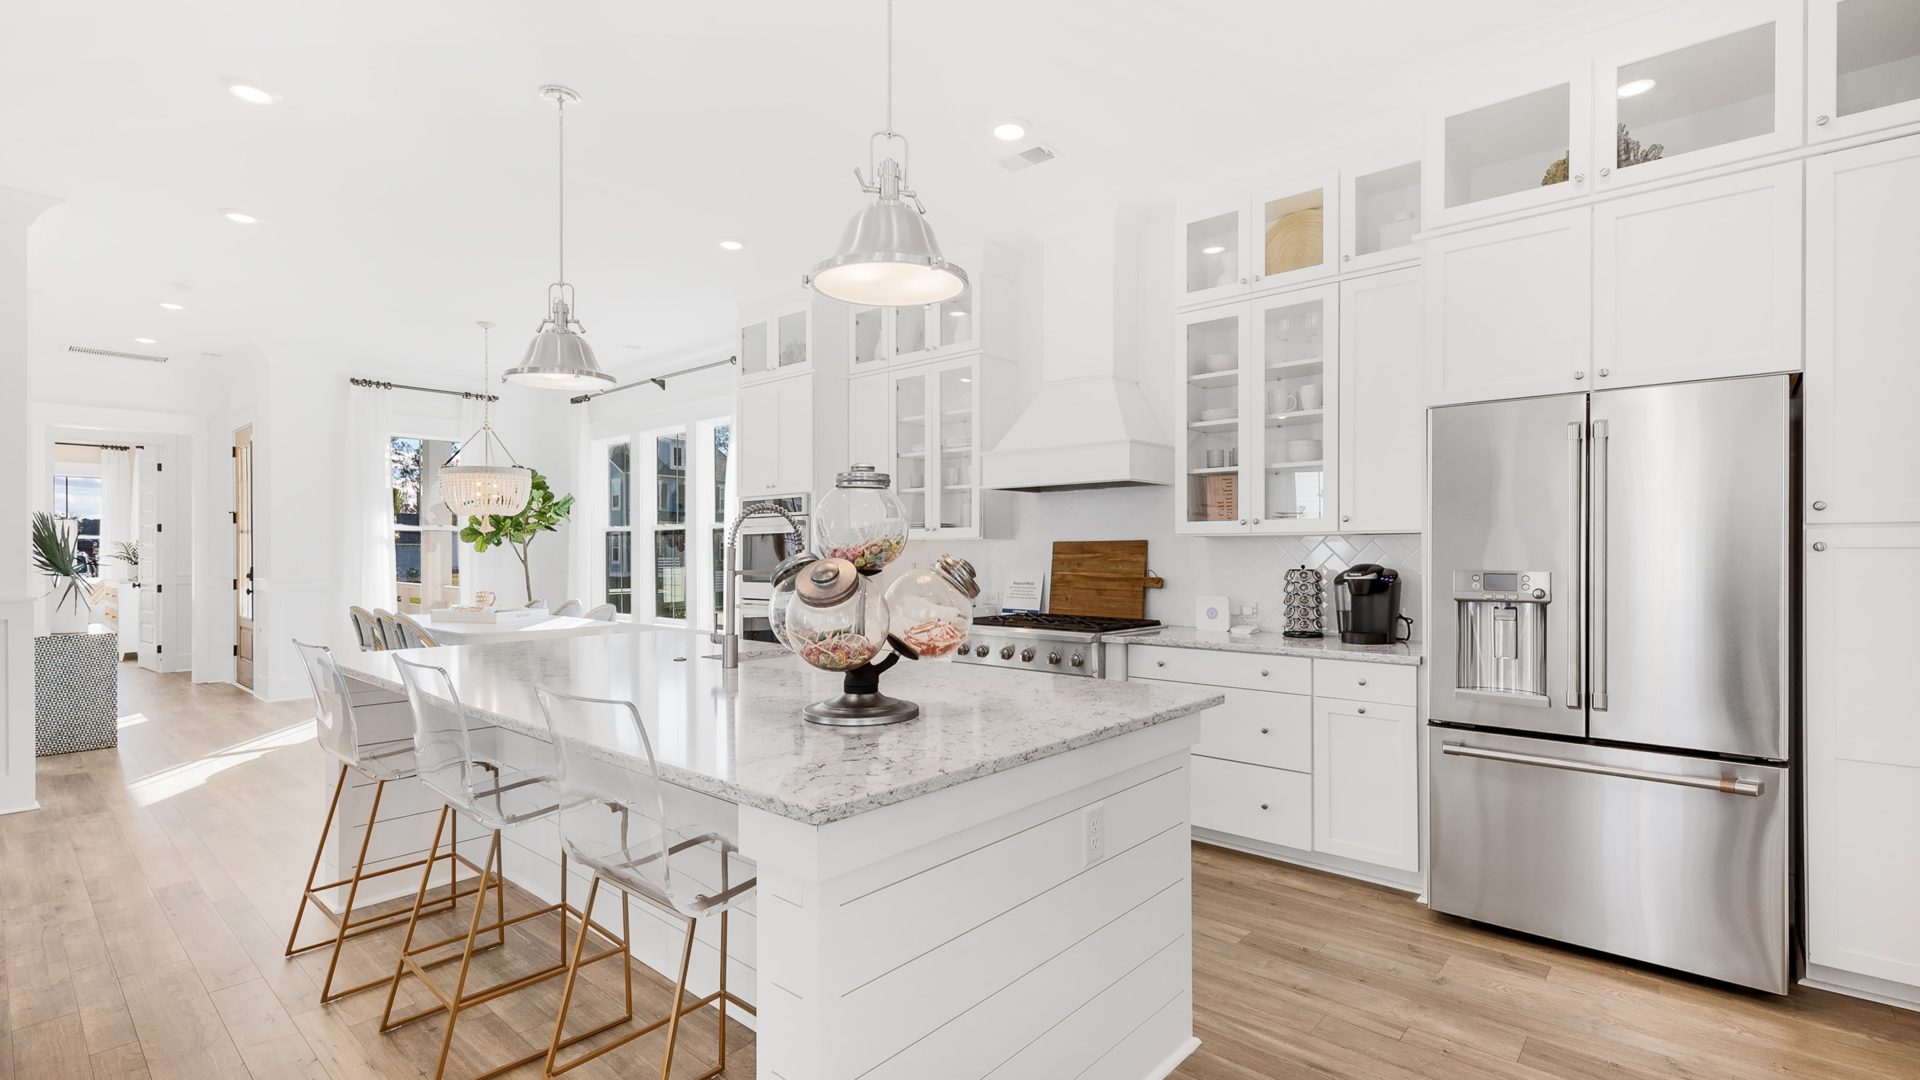 The Connected Home by Lennar   Charleston   Lennar Resource Center